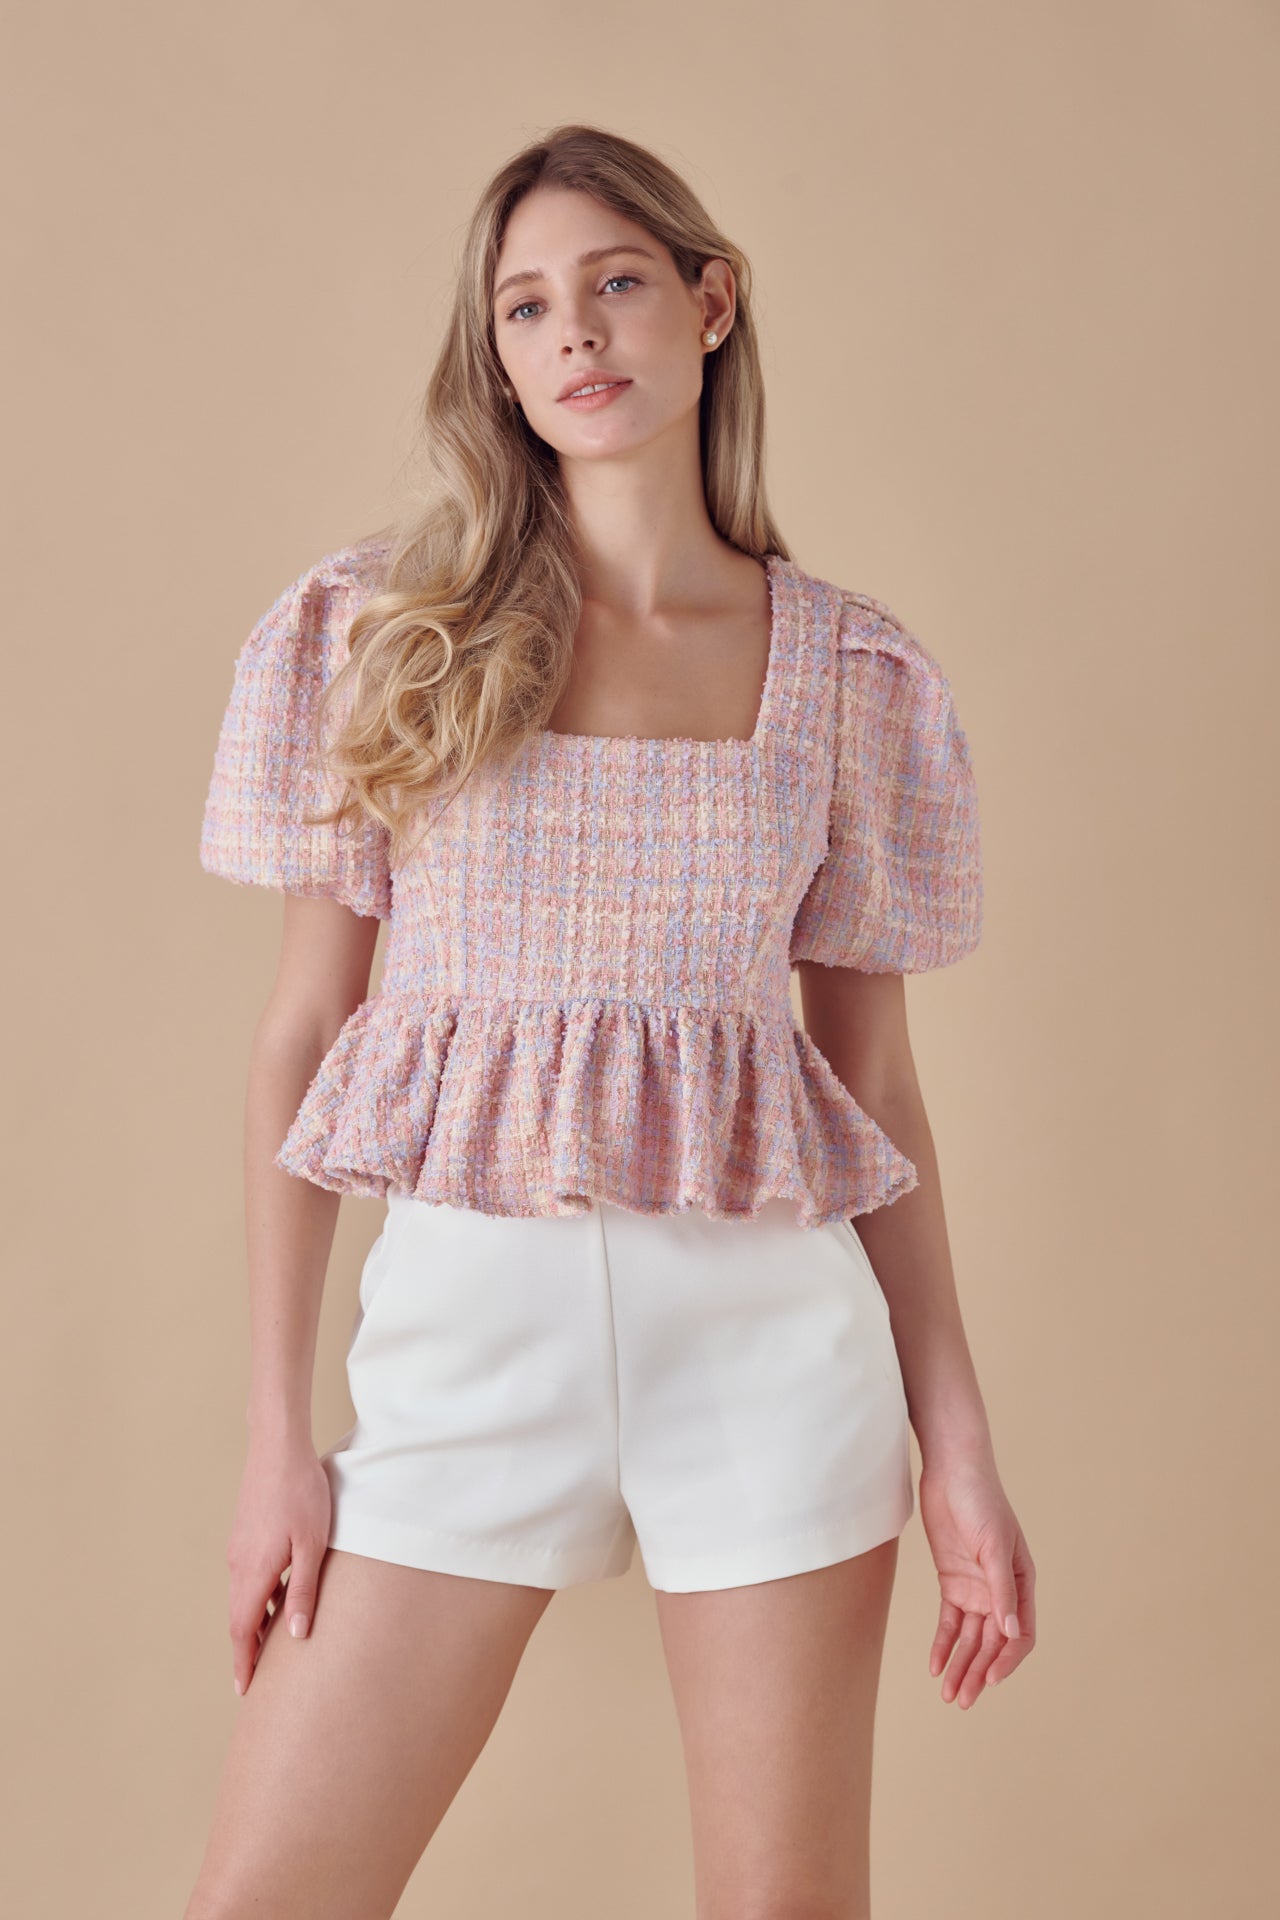 Endless Rose - Multi Tweed Baby Doll Top - Tops in Women's Clothing available at endlessrose.com